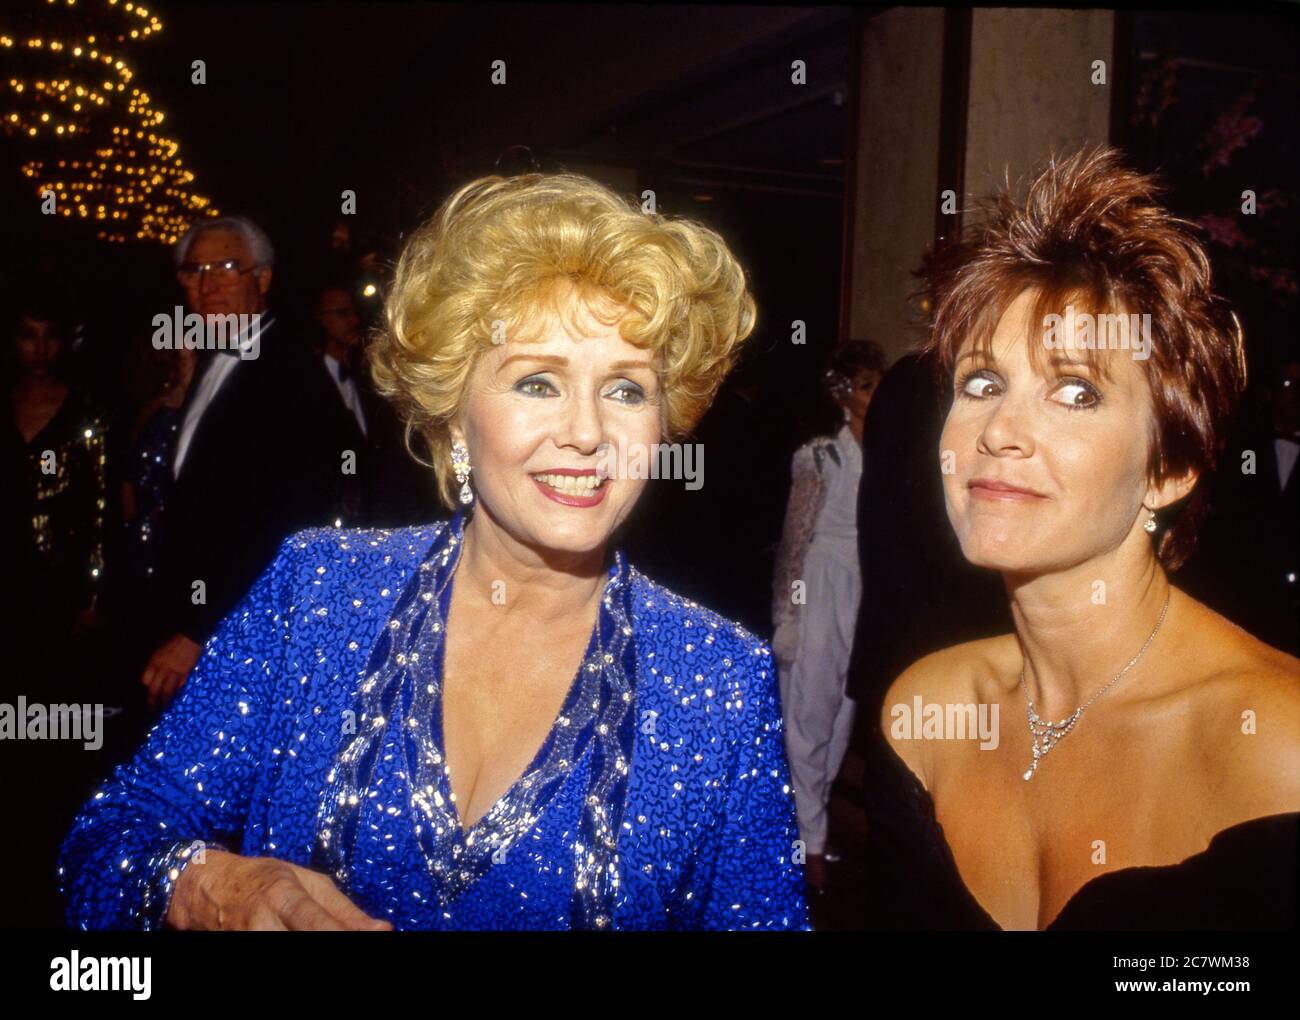 Mother and daughter Debbie Reynolds and Carrie Fisher mug for the cameras at a gala in Beverly HIlls, CA Stock Photo